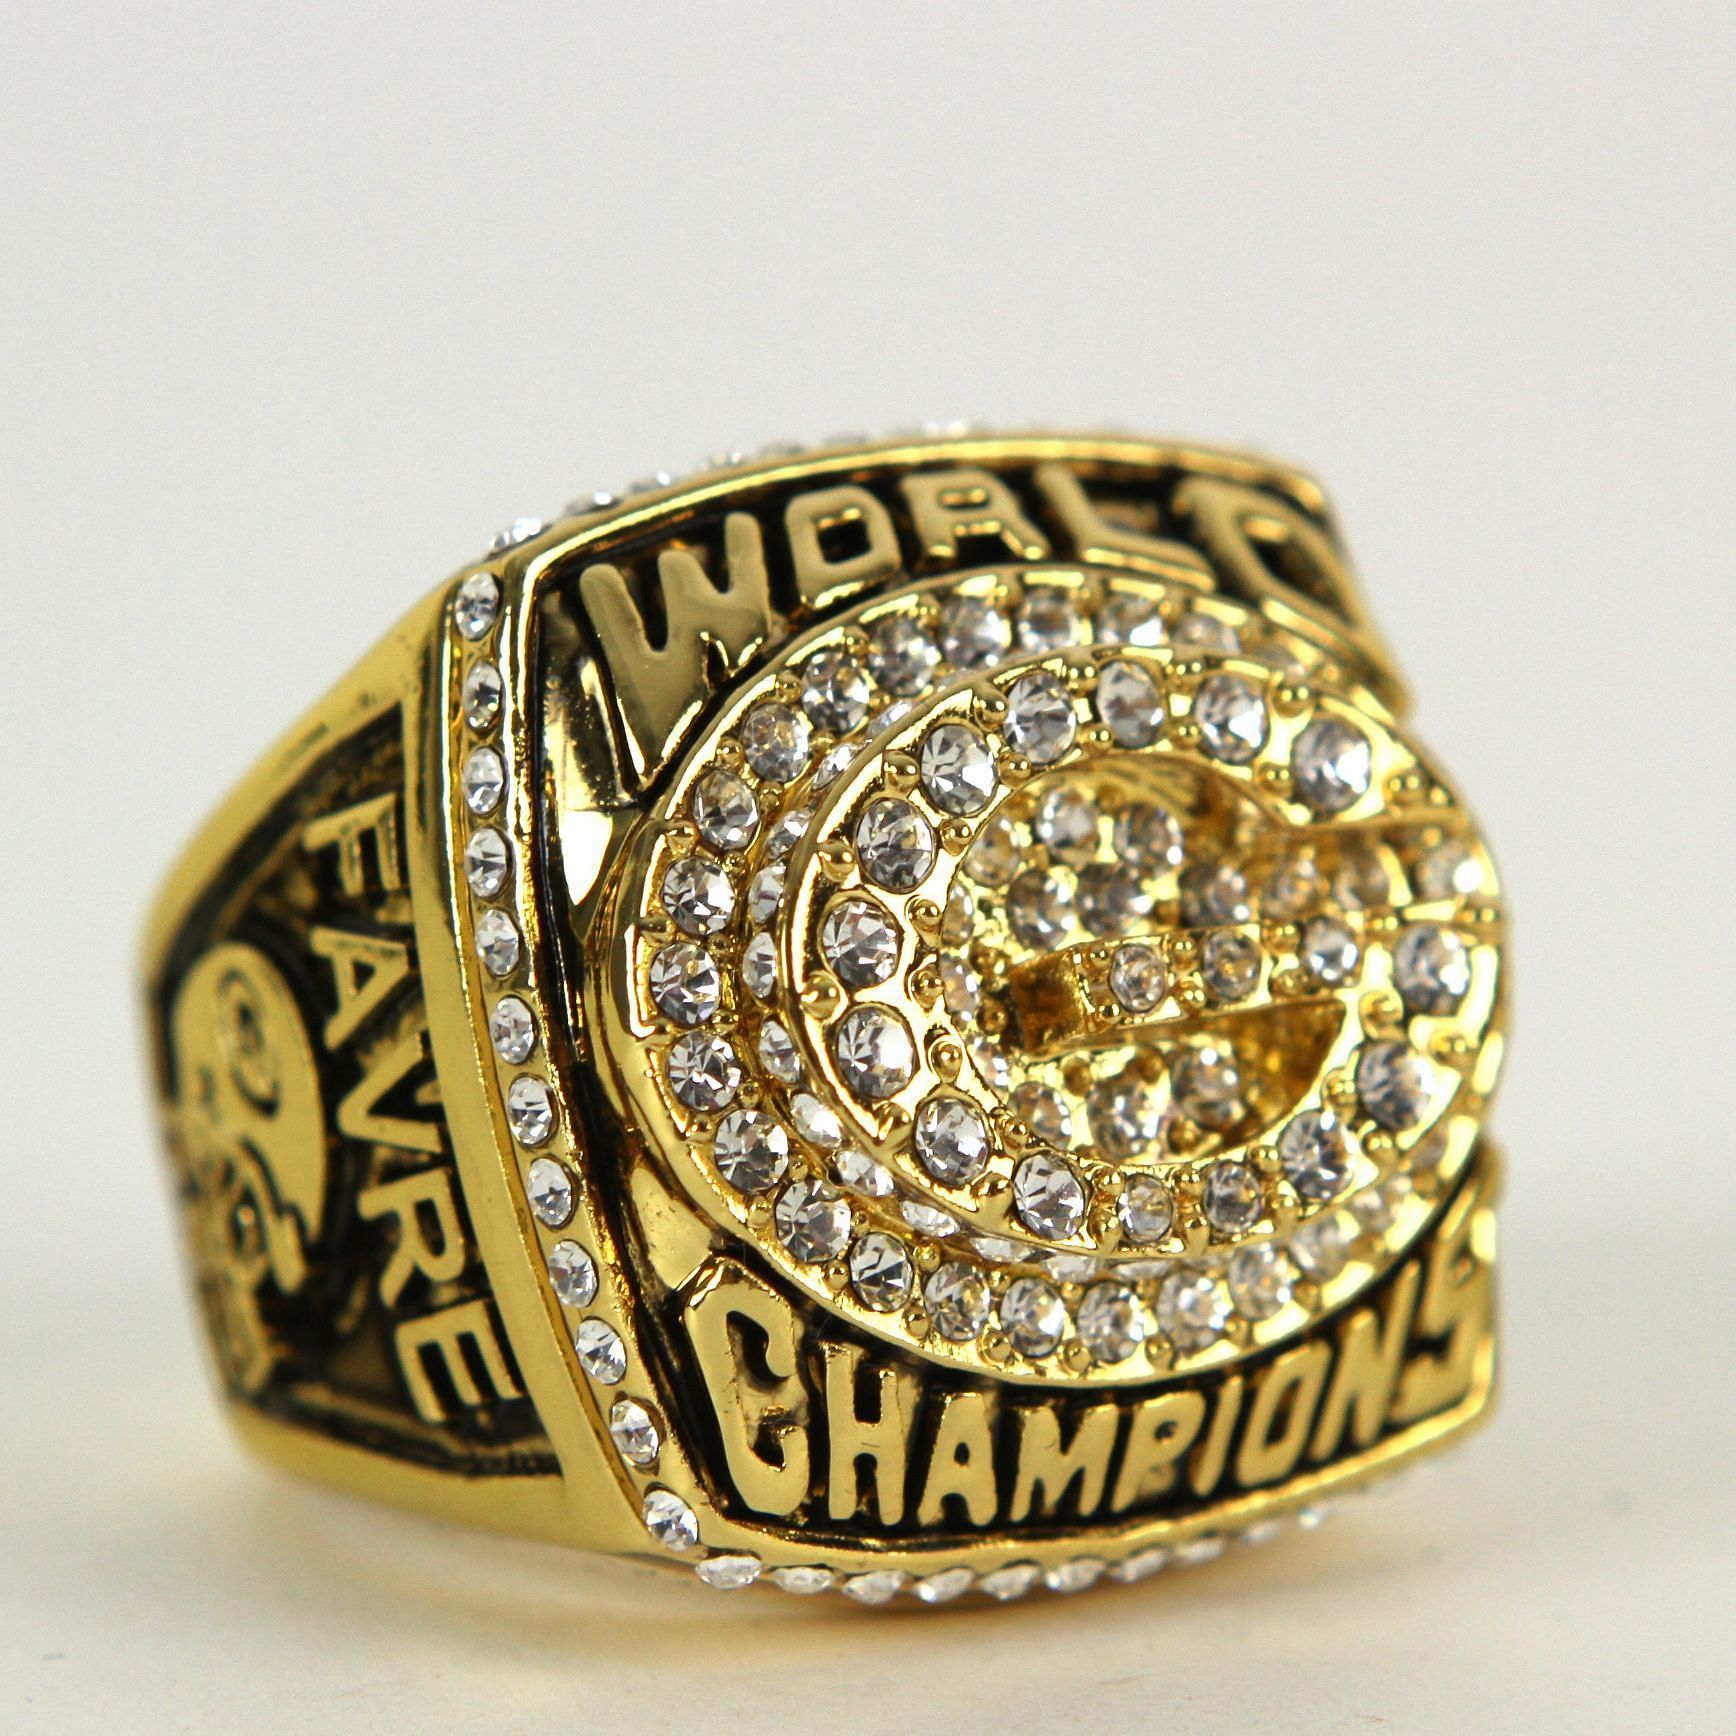 Green Bay Packers Super Bowl XXXI ring